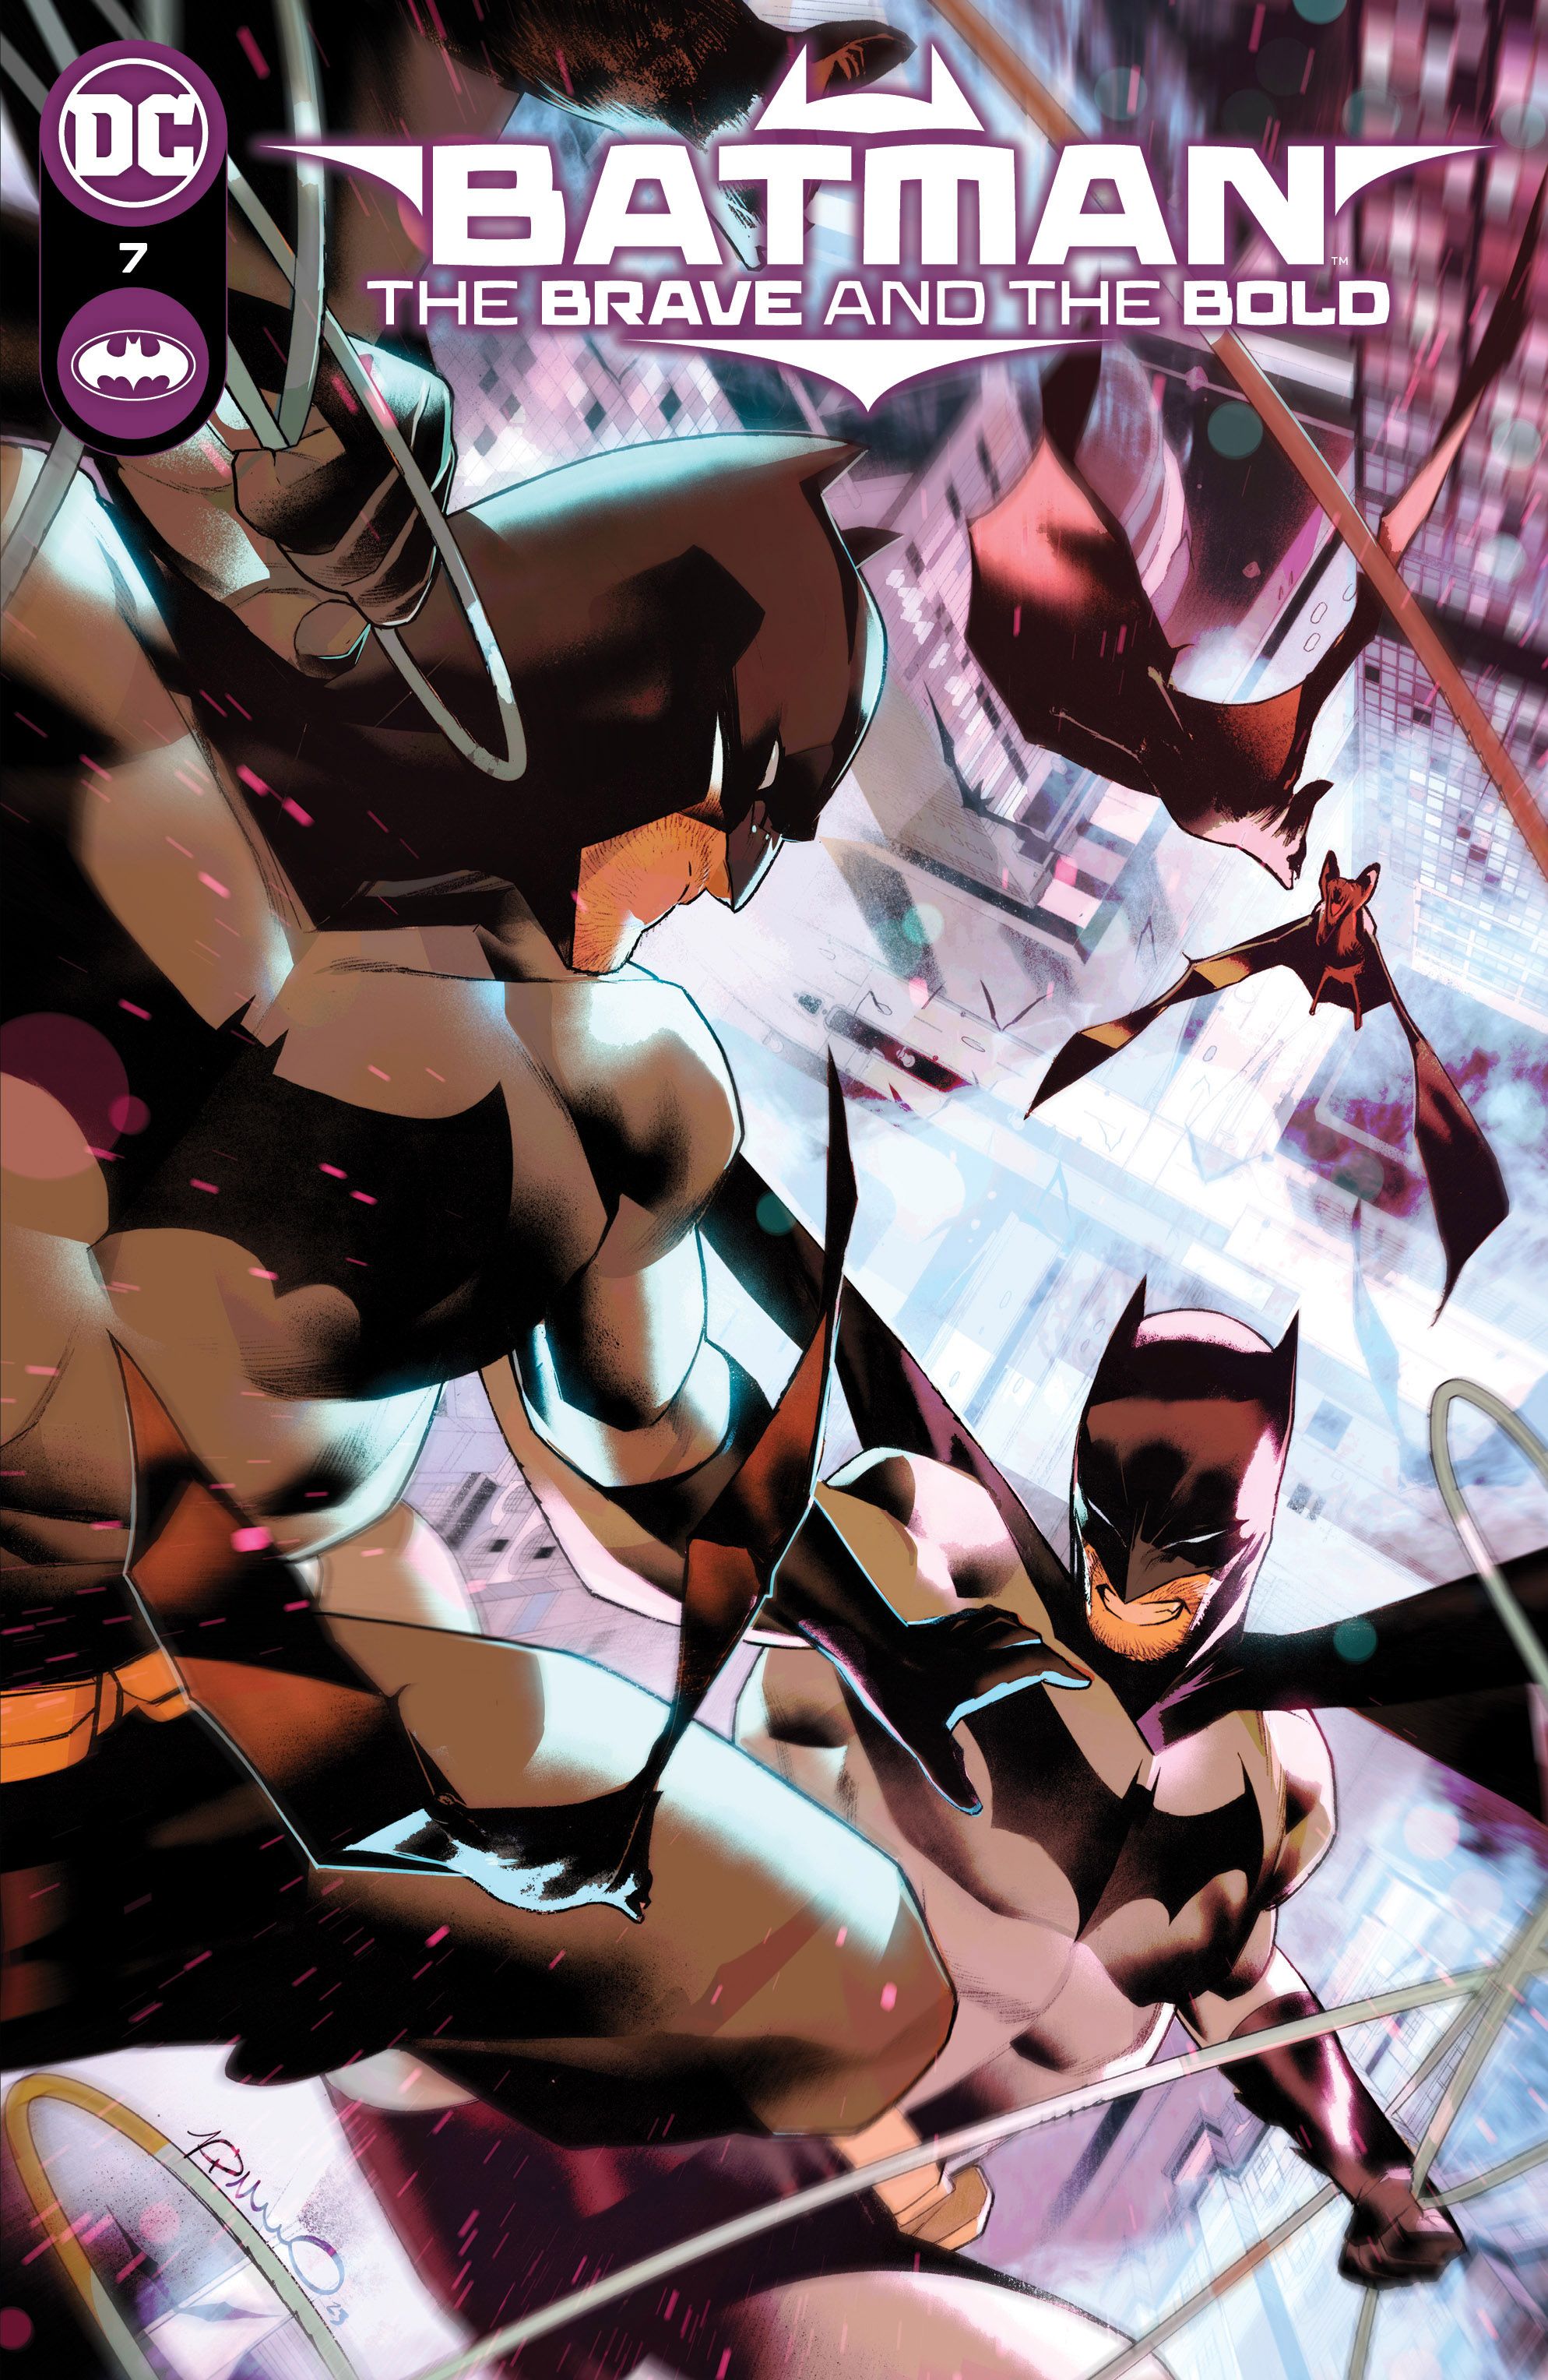 Batman: The Brave and the Bold #7 Comic